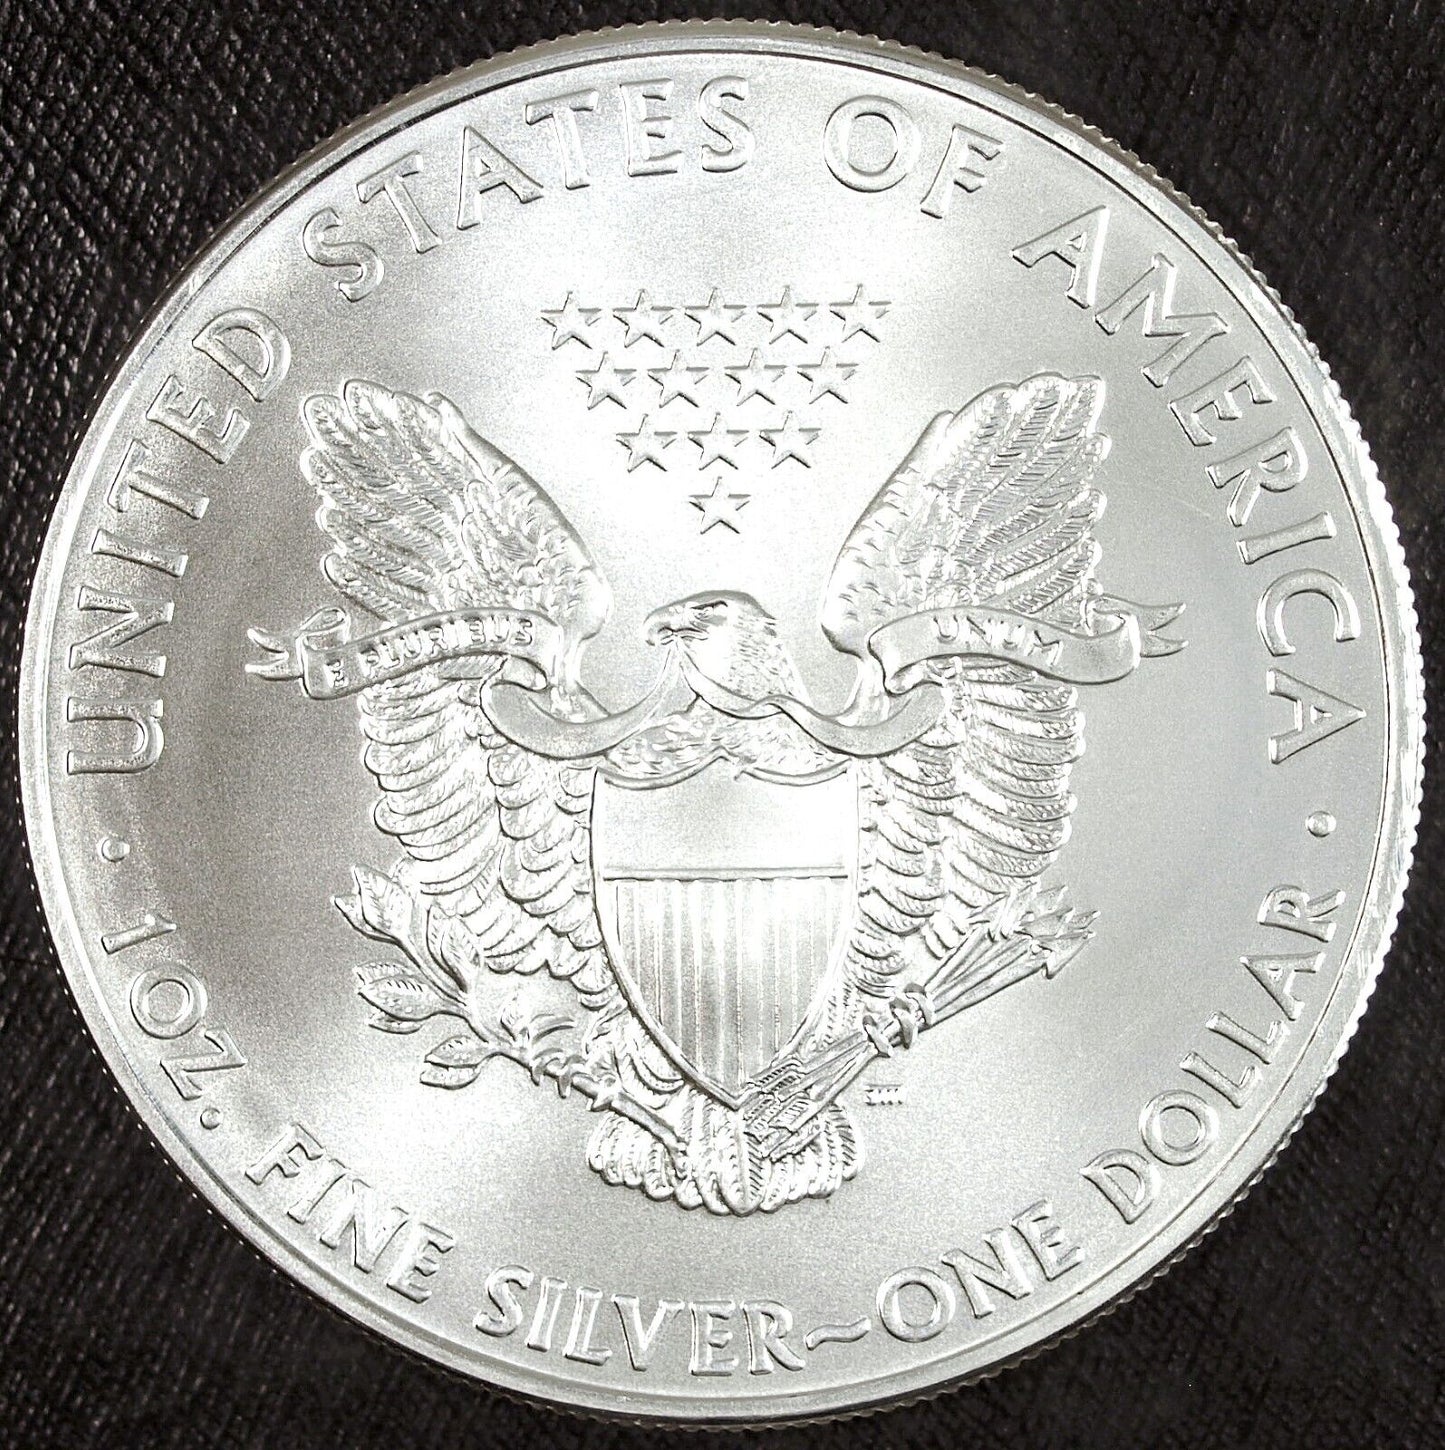 2011 U.S. Mint American Silver Eagle ☆☆ Uncirculated ☆☆ Great Collectible 312